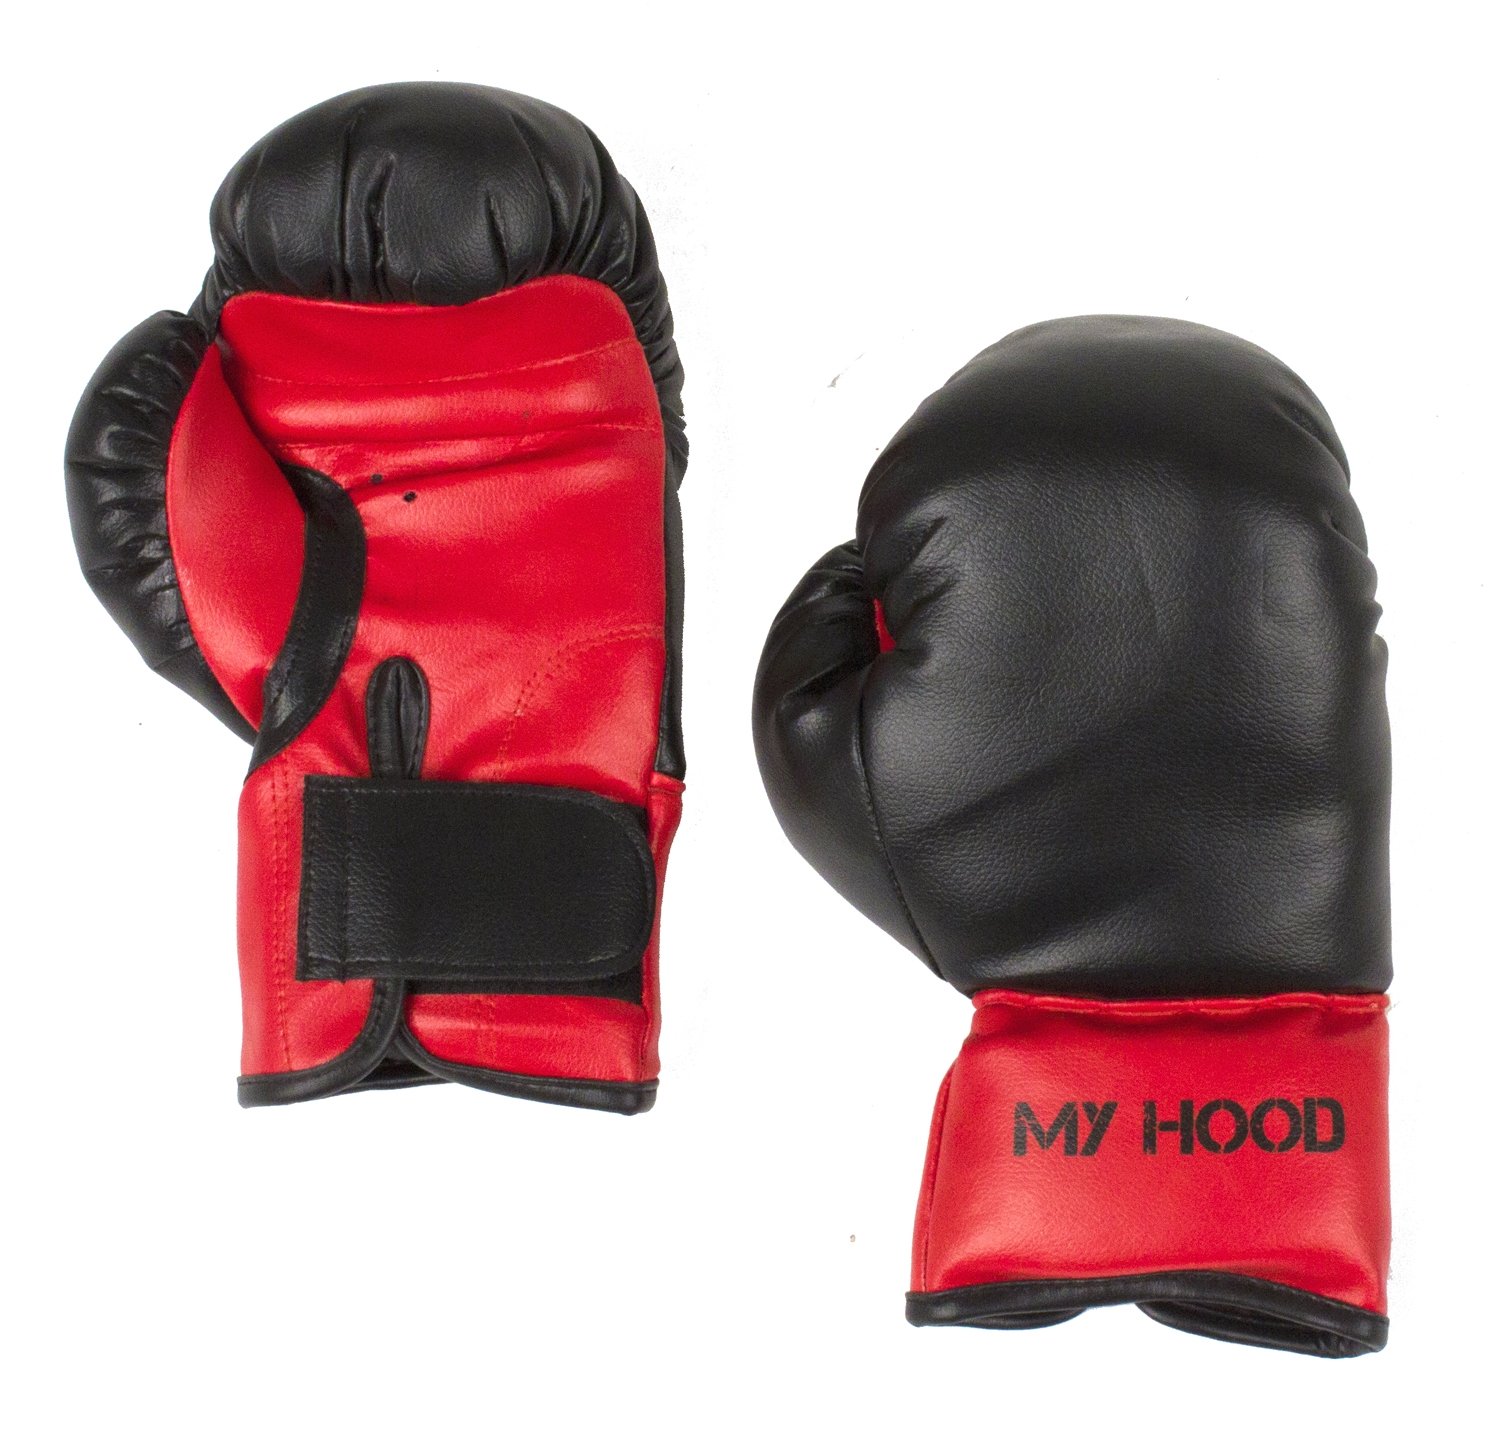 My Hood - Boxing Gloves (10-14 years) (201037)